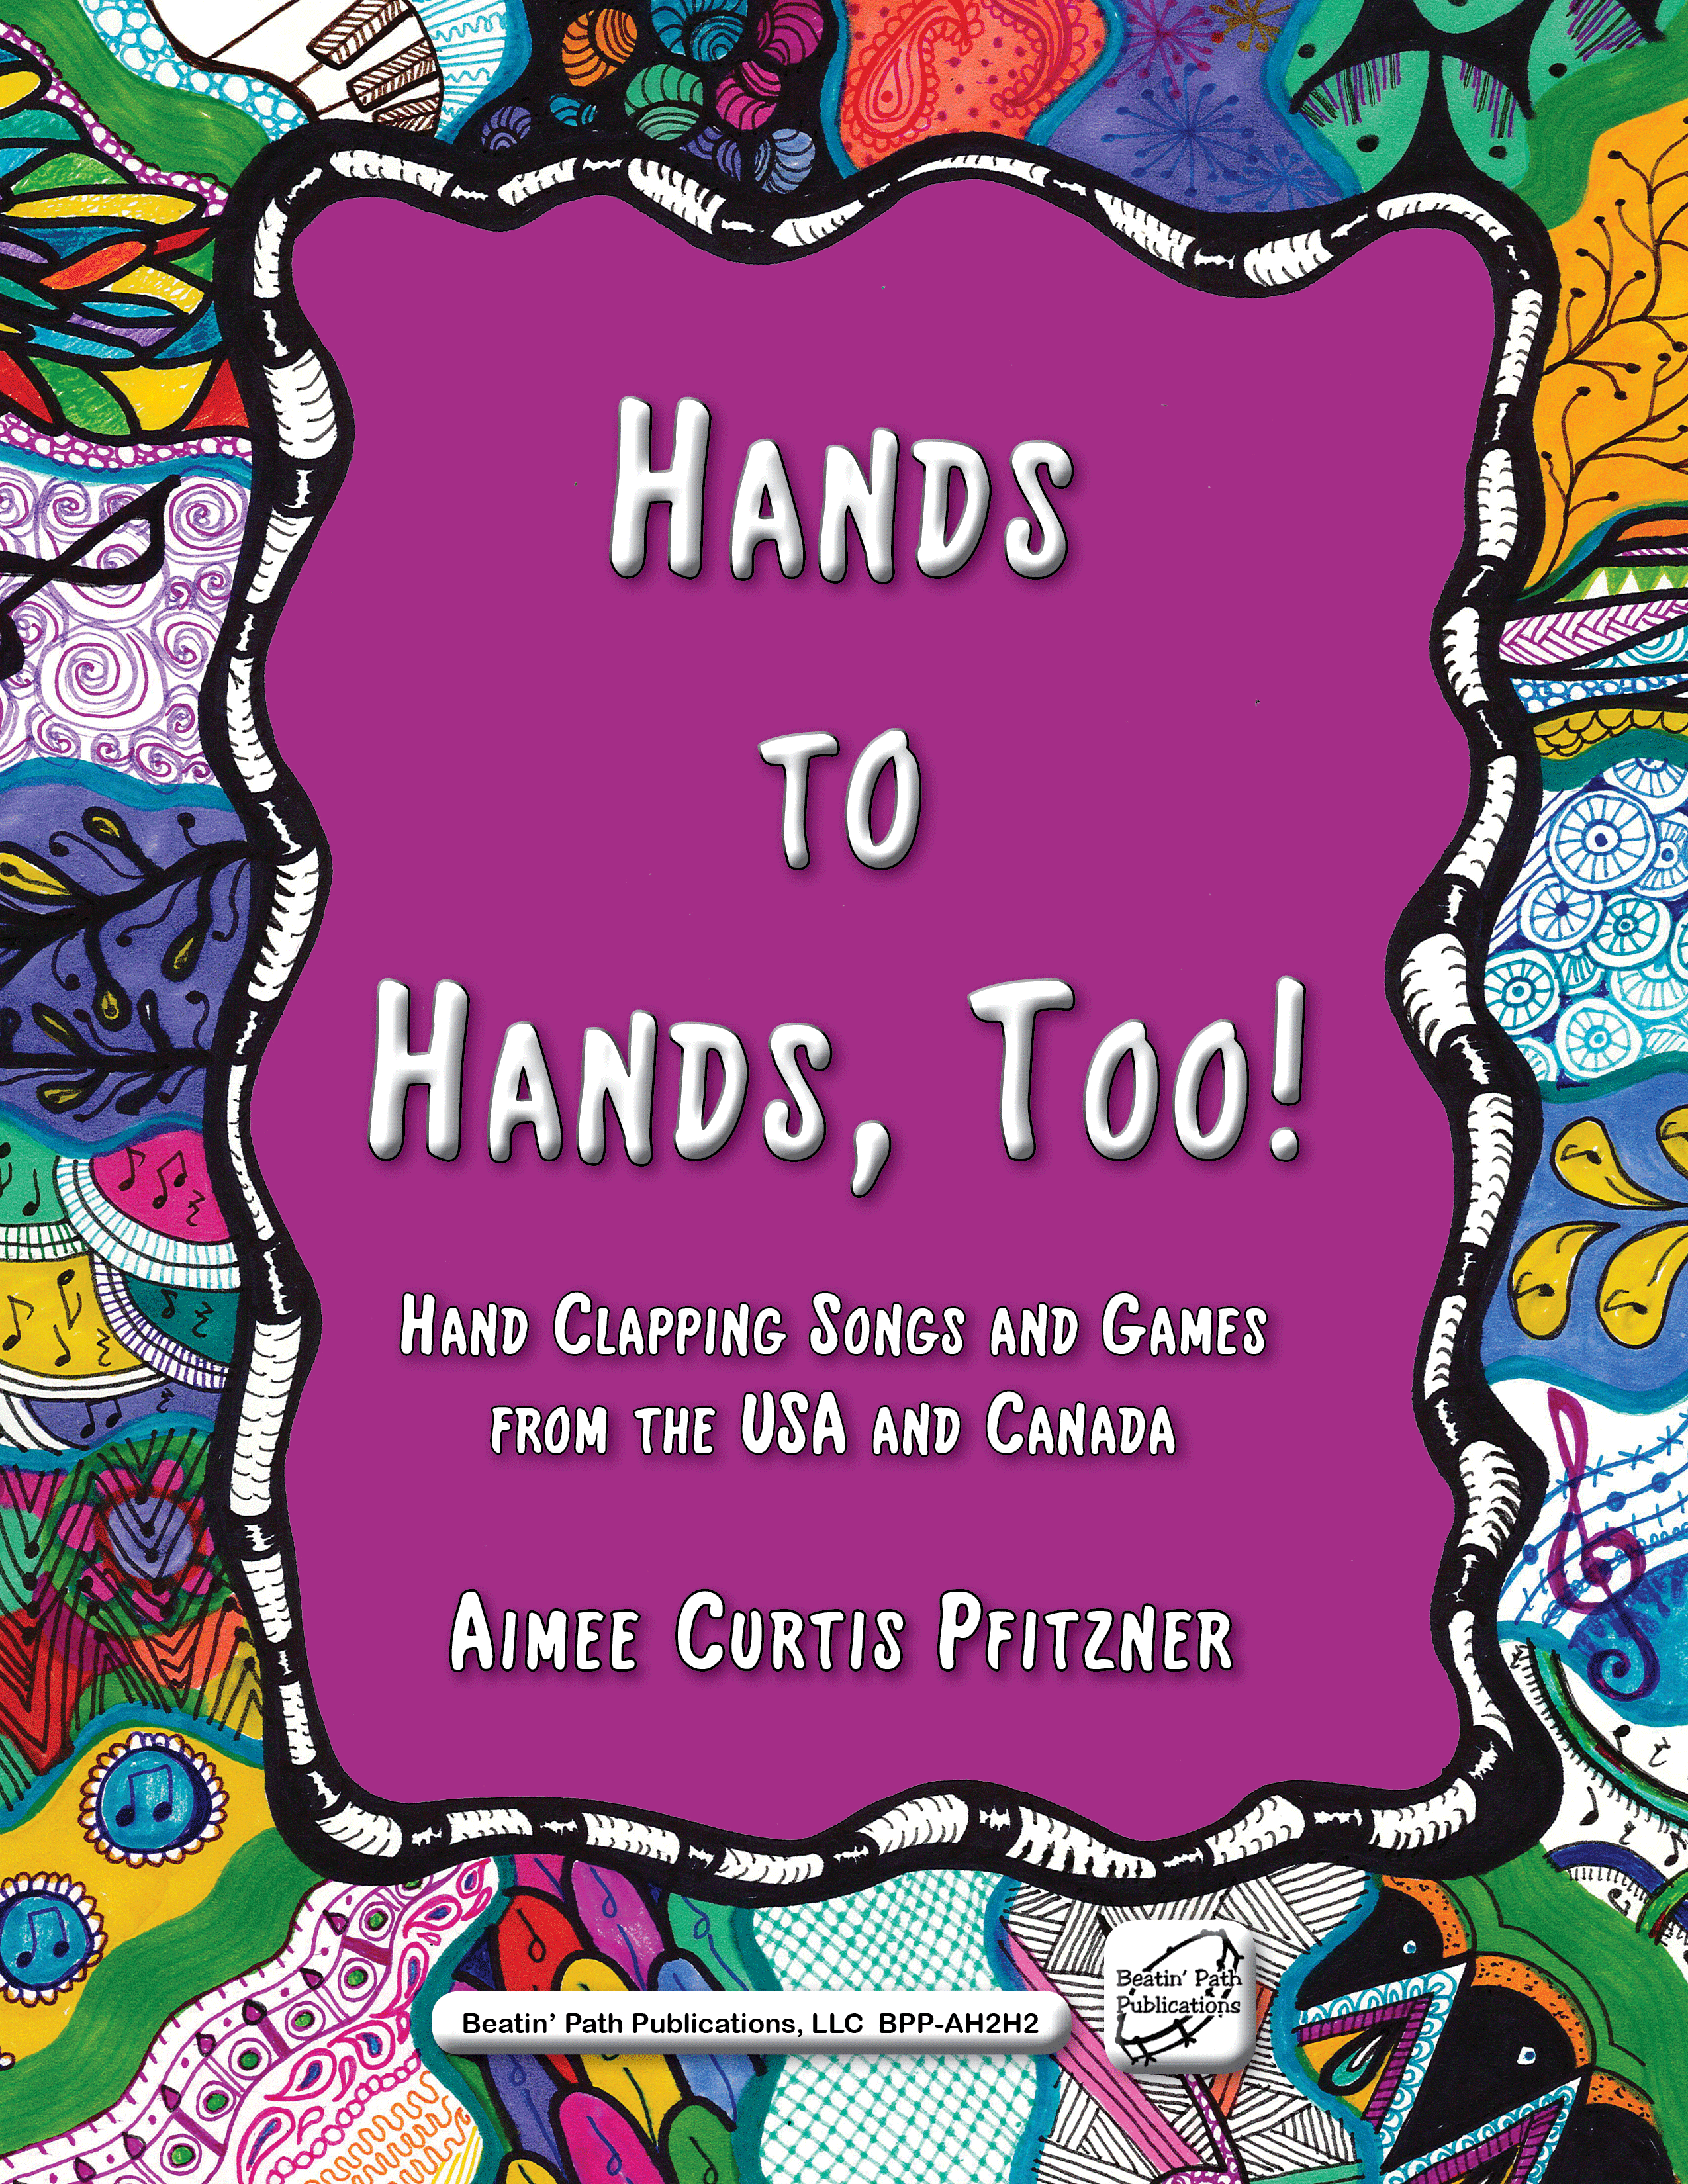 Hands to Hands, Too by Aimee Curtis Pfitzner